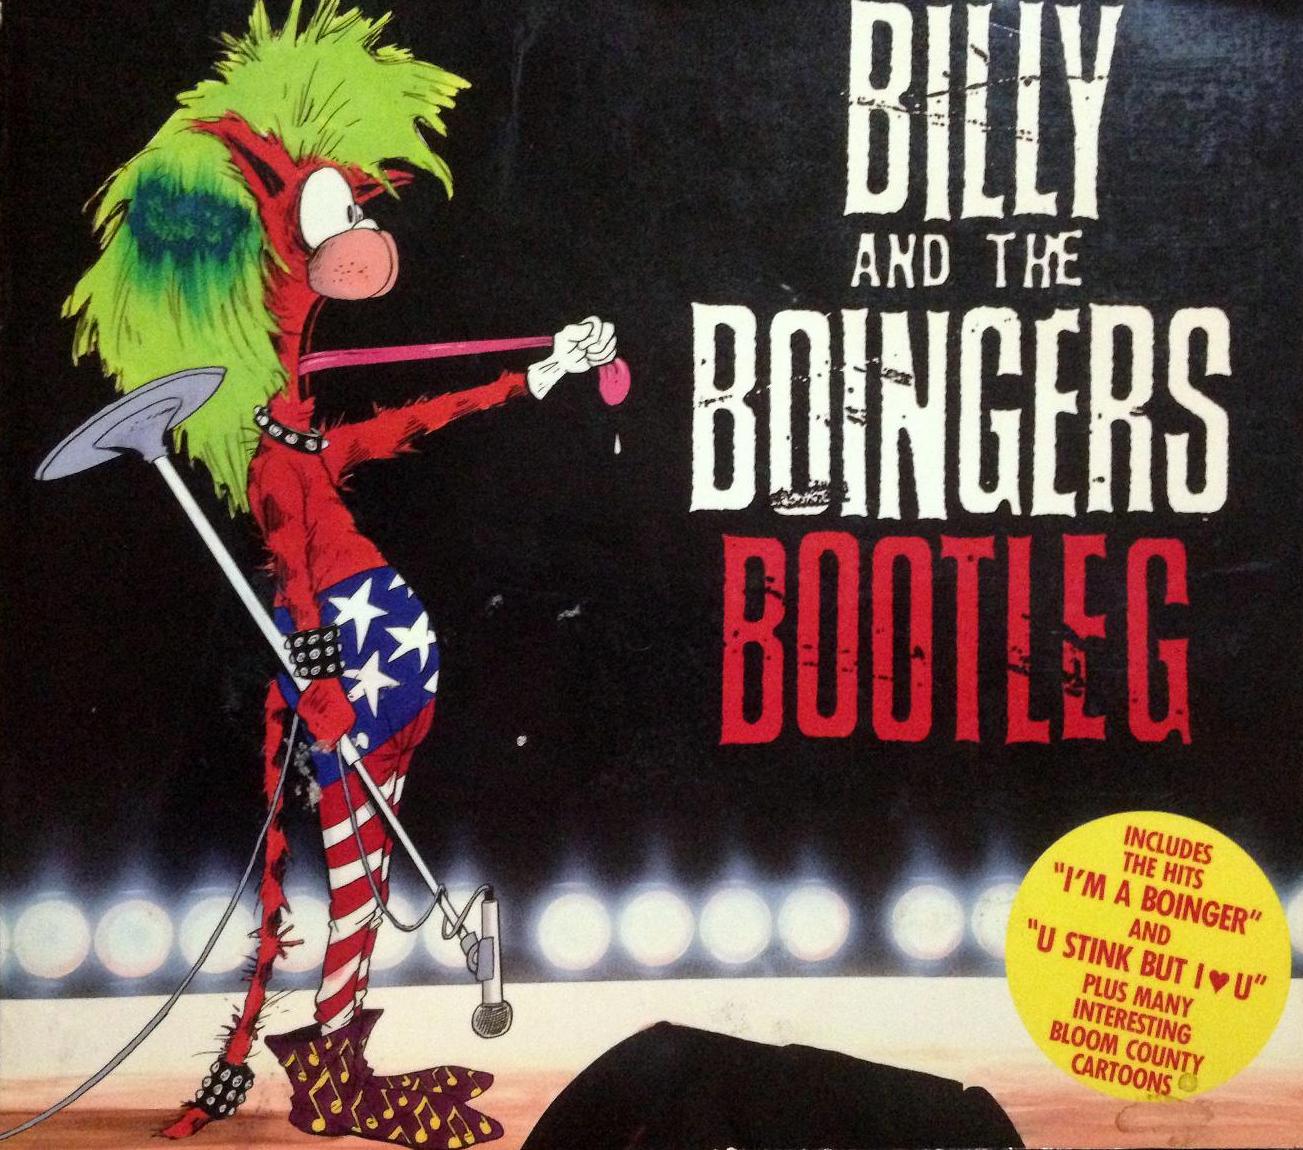 billy and the boingers bootleg (2)